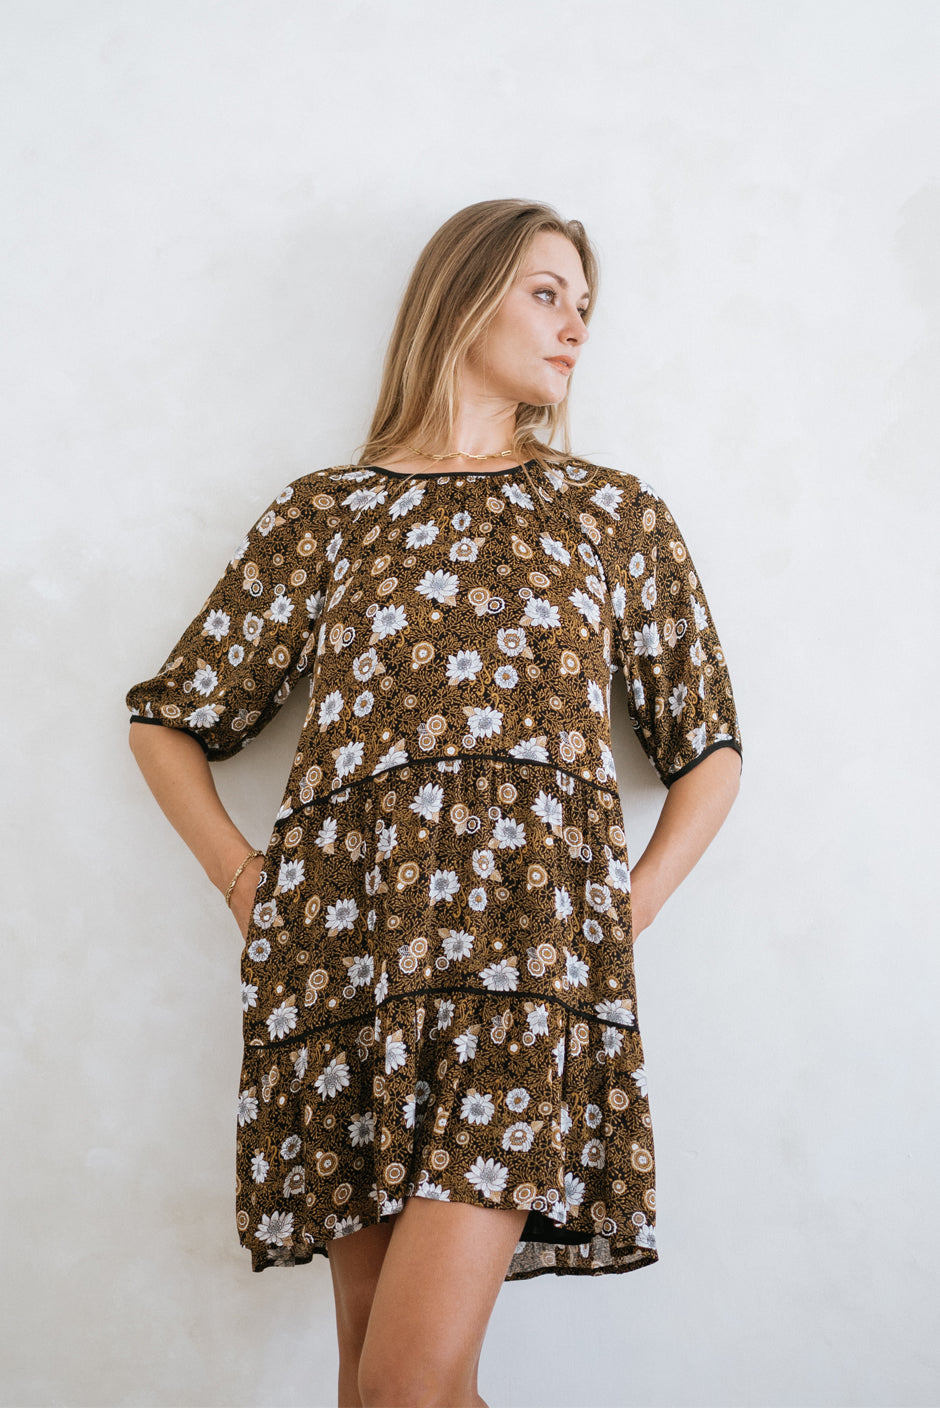 Brown/Tan/Beige Bohemian Floral Paisley Print Spring/Summer 2022 Clover Mini Dress from Paneros Clothing. Front View with tiered skirt/gathered tiers.